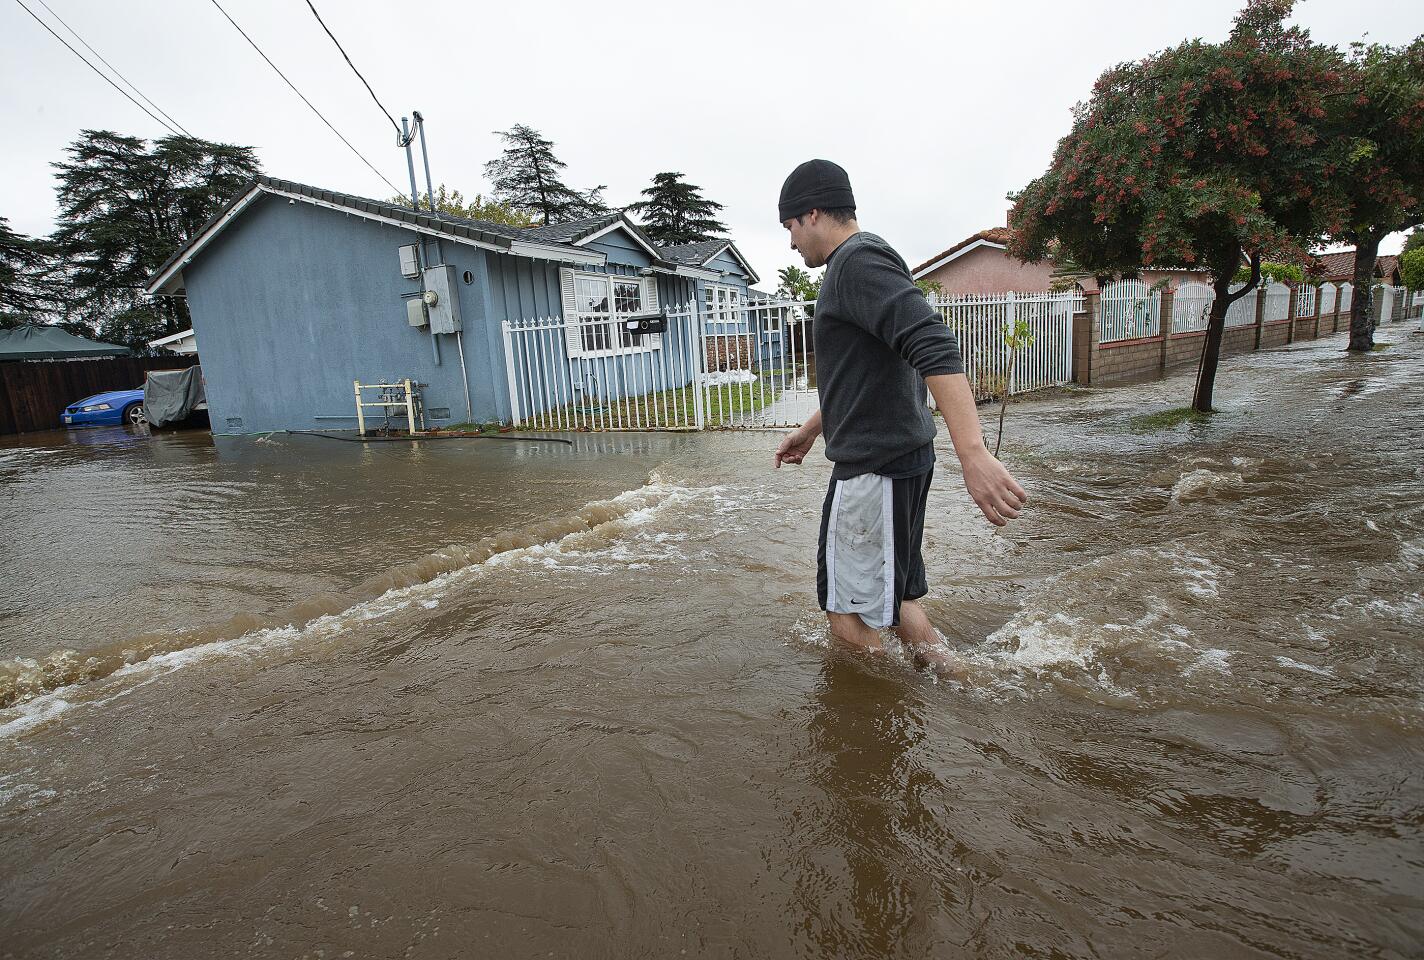 MISSION HILLS, CA-DECEMBER 4, 2019: Mission Hills resident Alberto Rodriguez, 32, walks through knee deep water on a flooded street outside of his home, at left, on Woodman Ave. The cause of the flood was a rupture from a 72 inch steel riveted trunk line that was installed back in 1914. (Mel Melcon/Los Angeles Times)